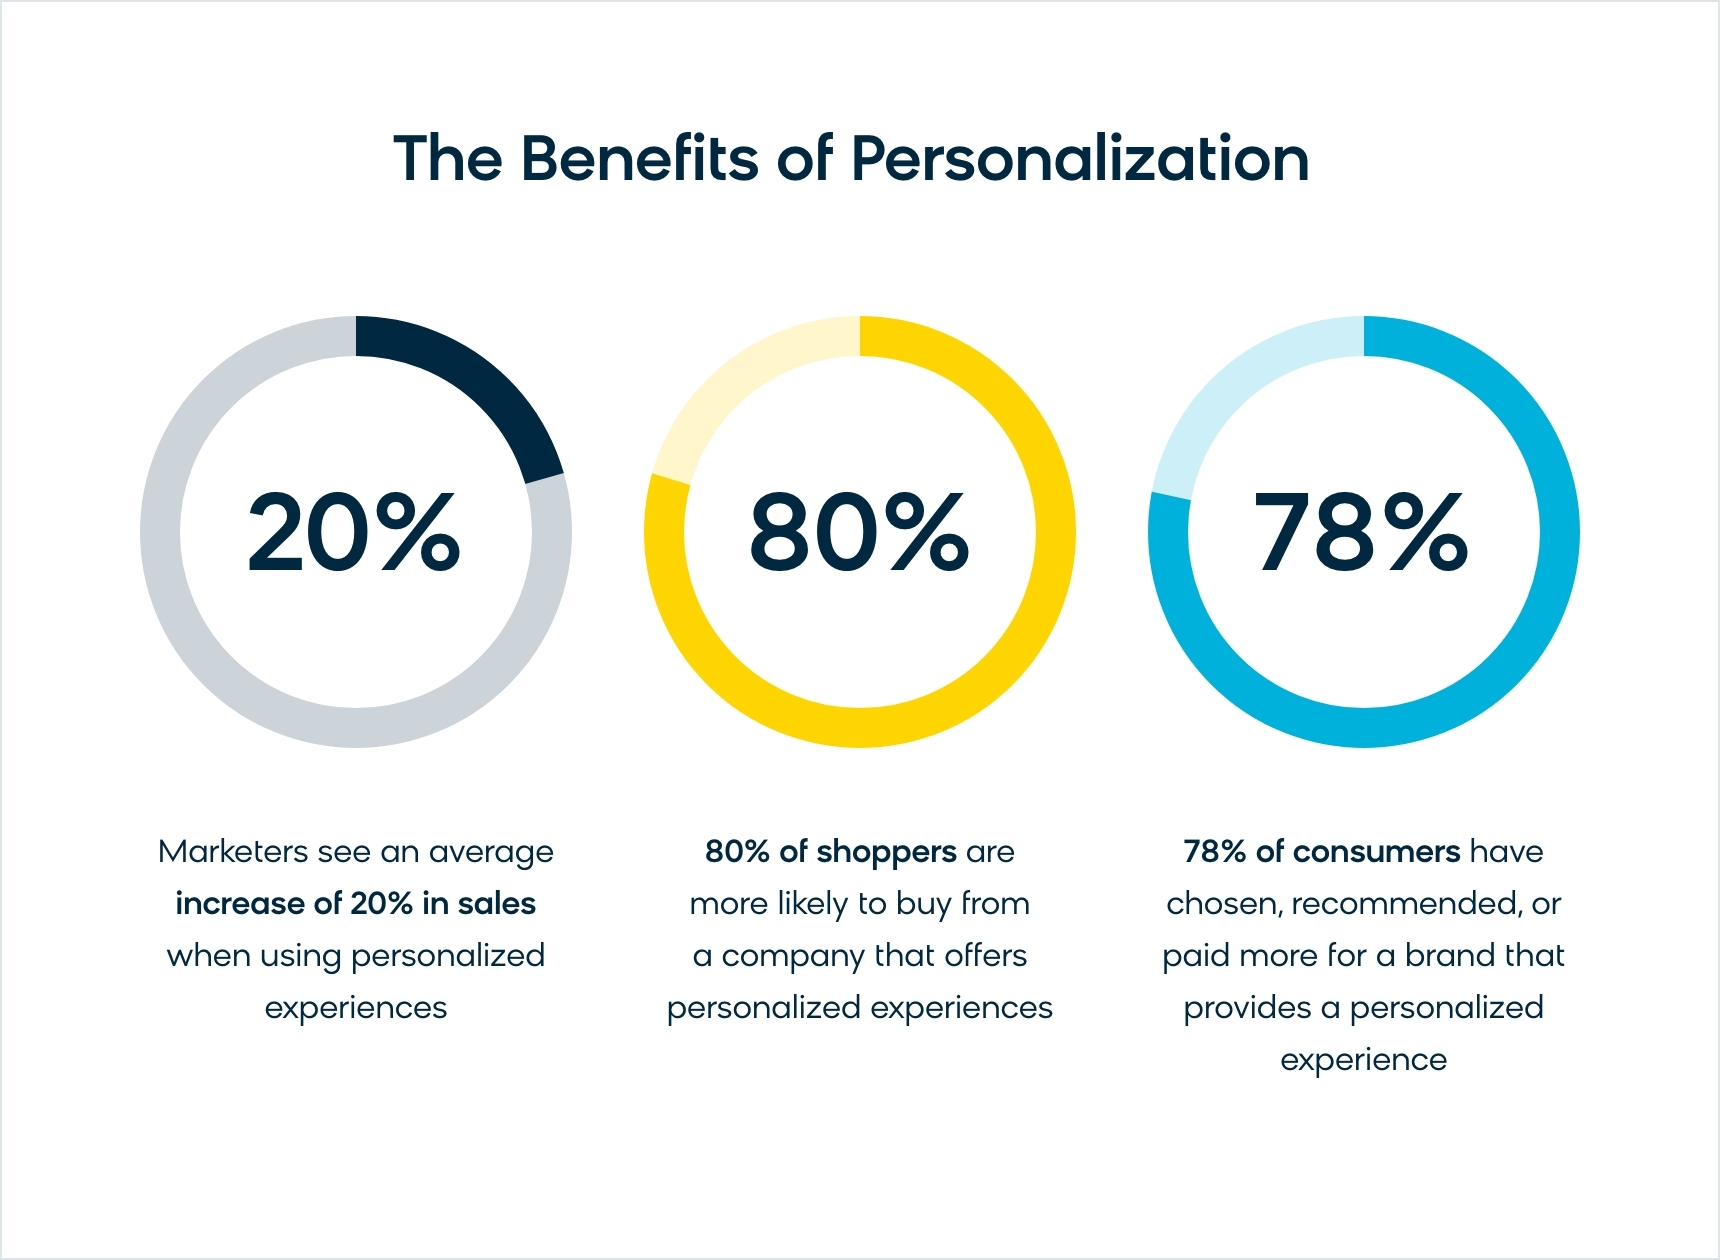 The benefits of personalization for e-commerce businesses, which transalte to increased sales, loyal customers, and repeat purchases.